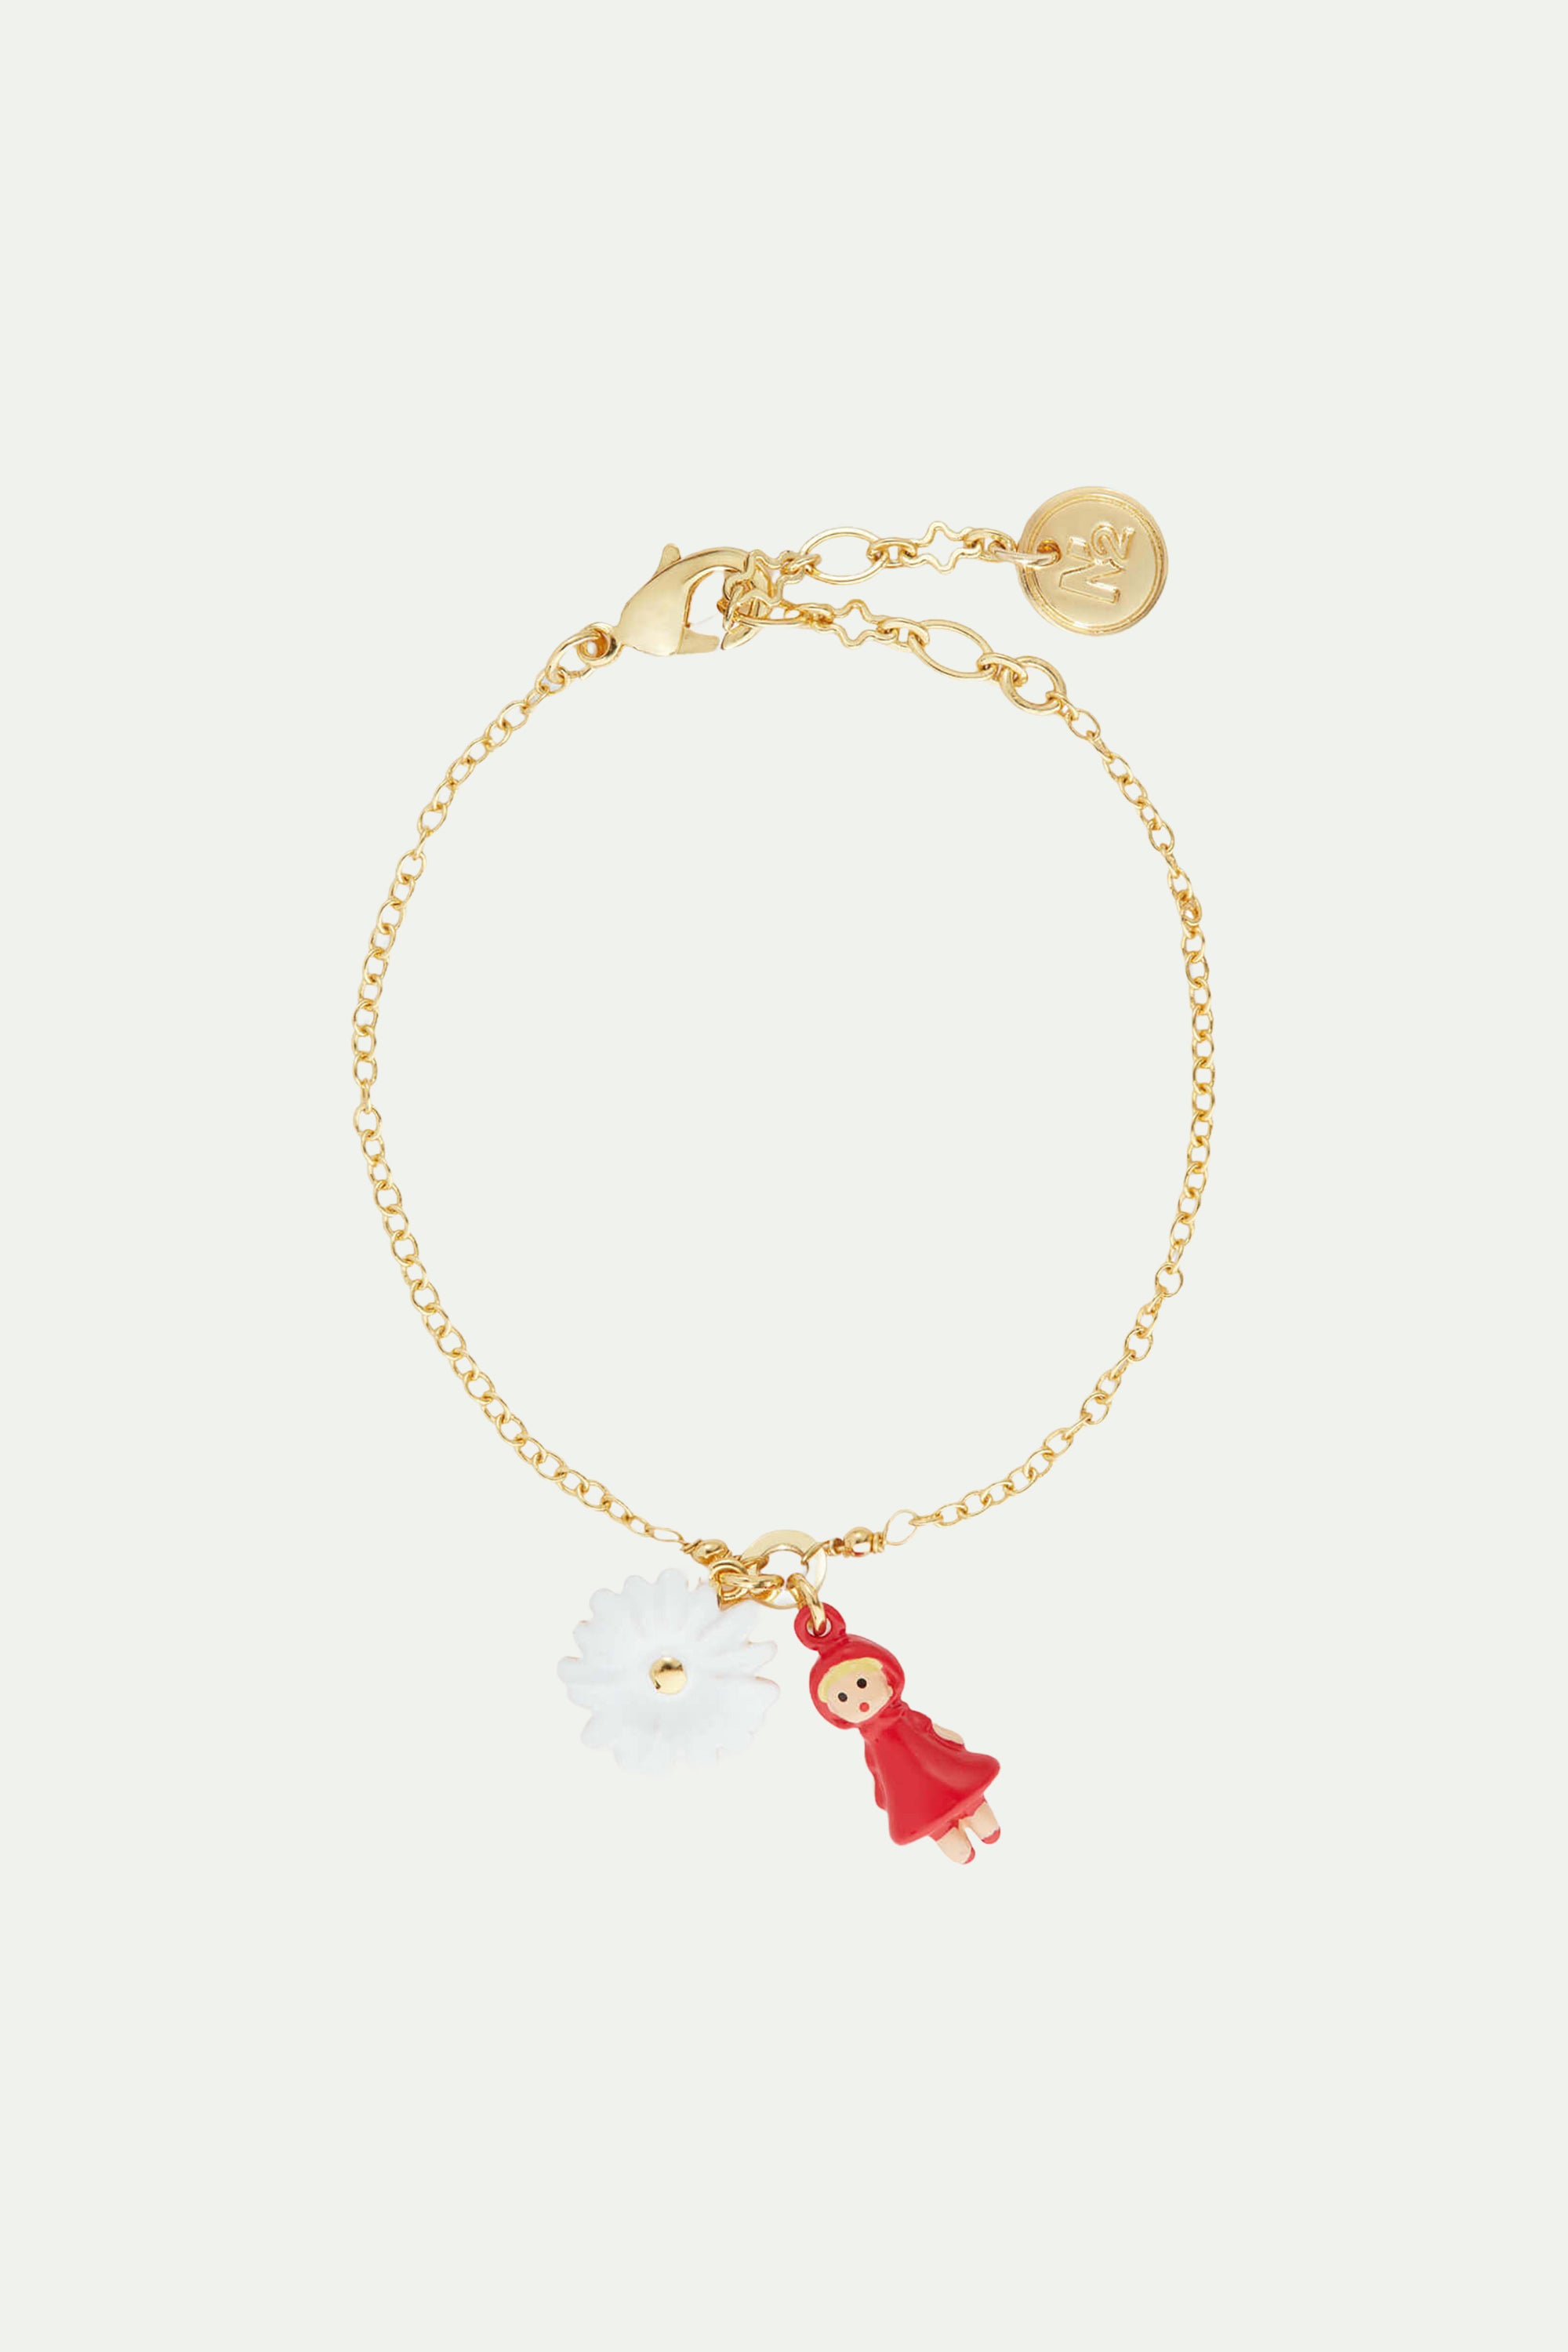 Daisy and Little Red Riding Hood charm bracelet